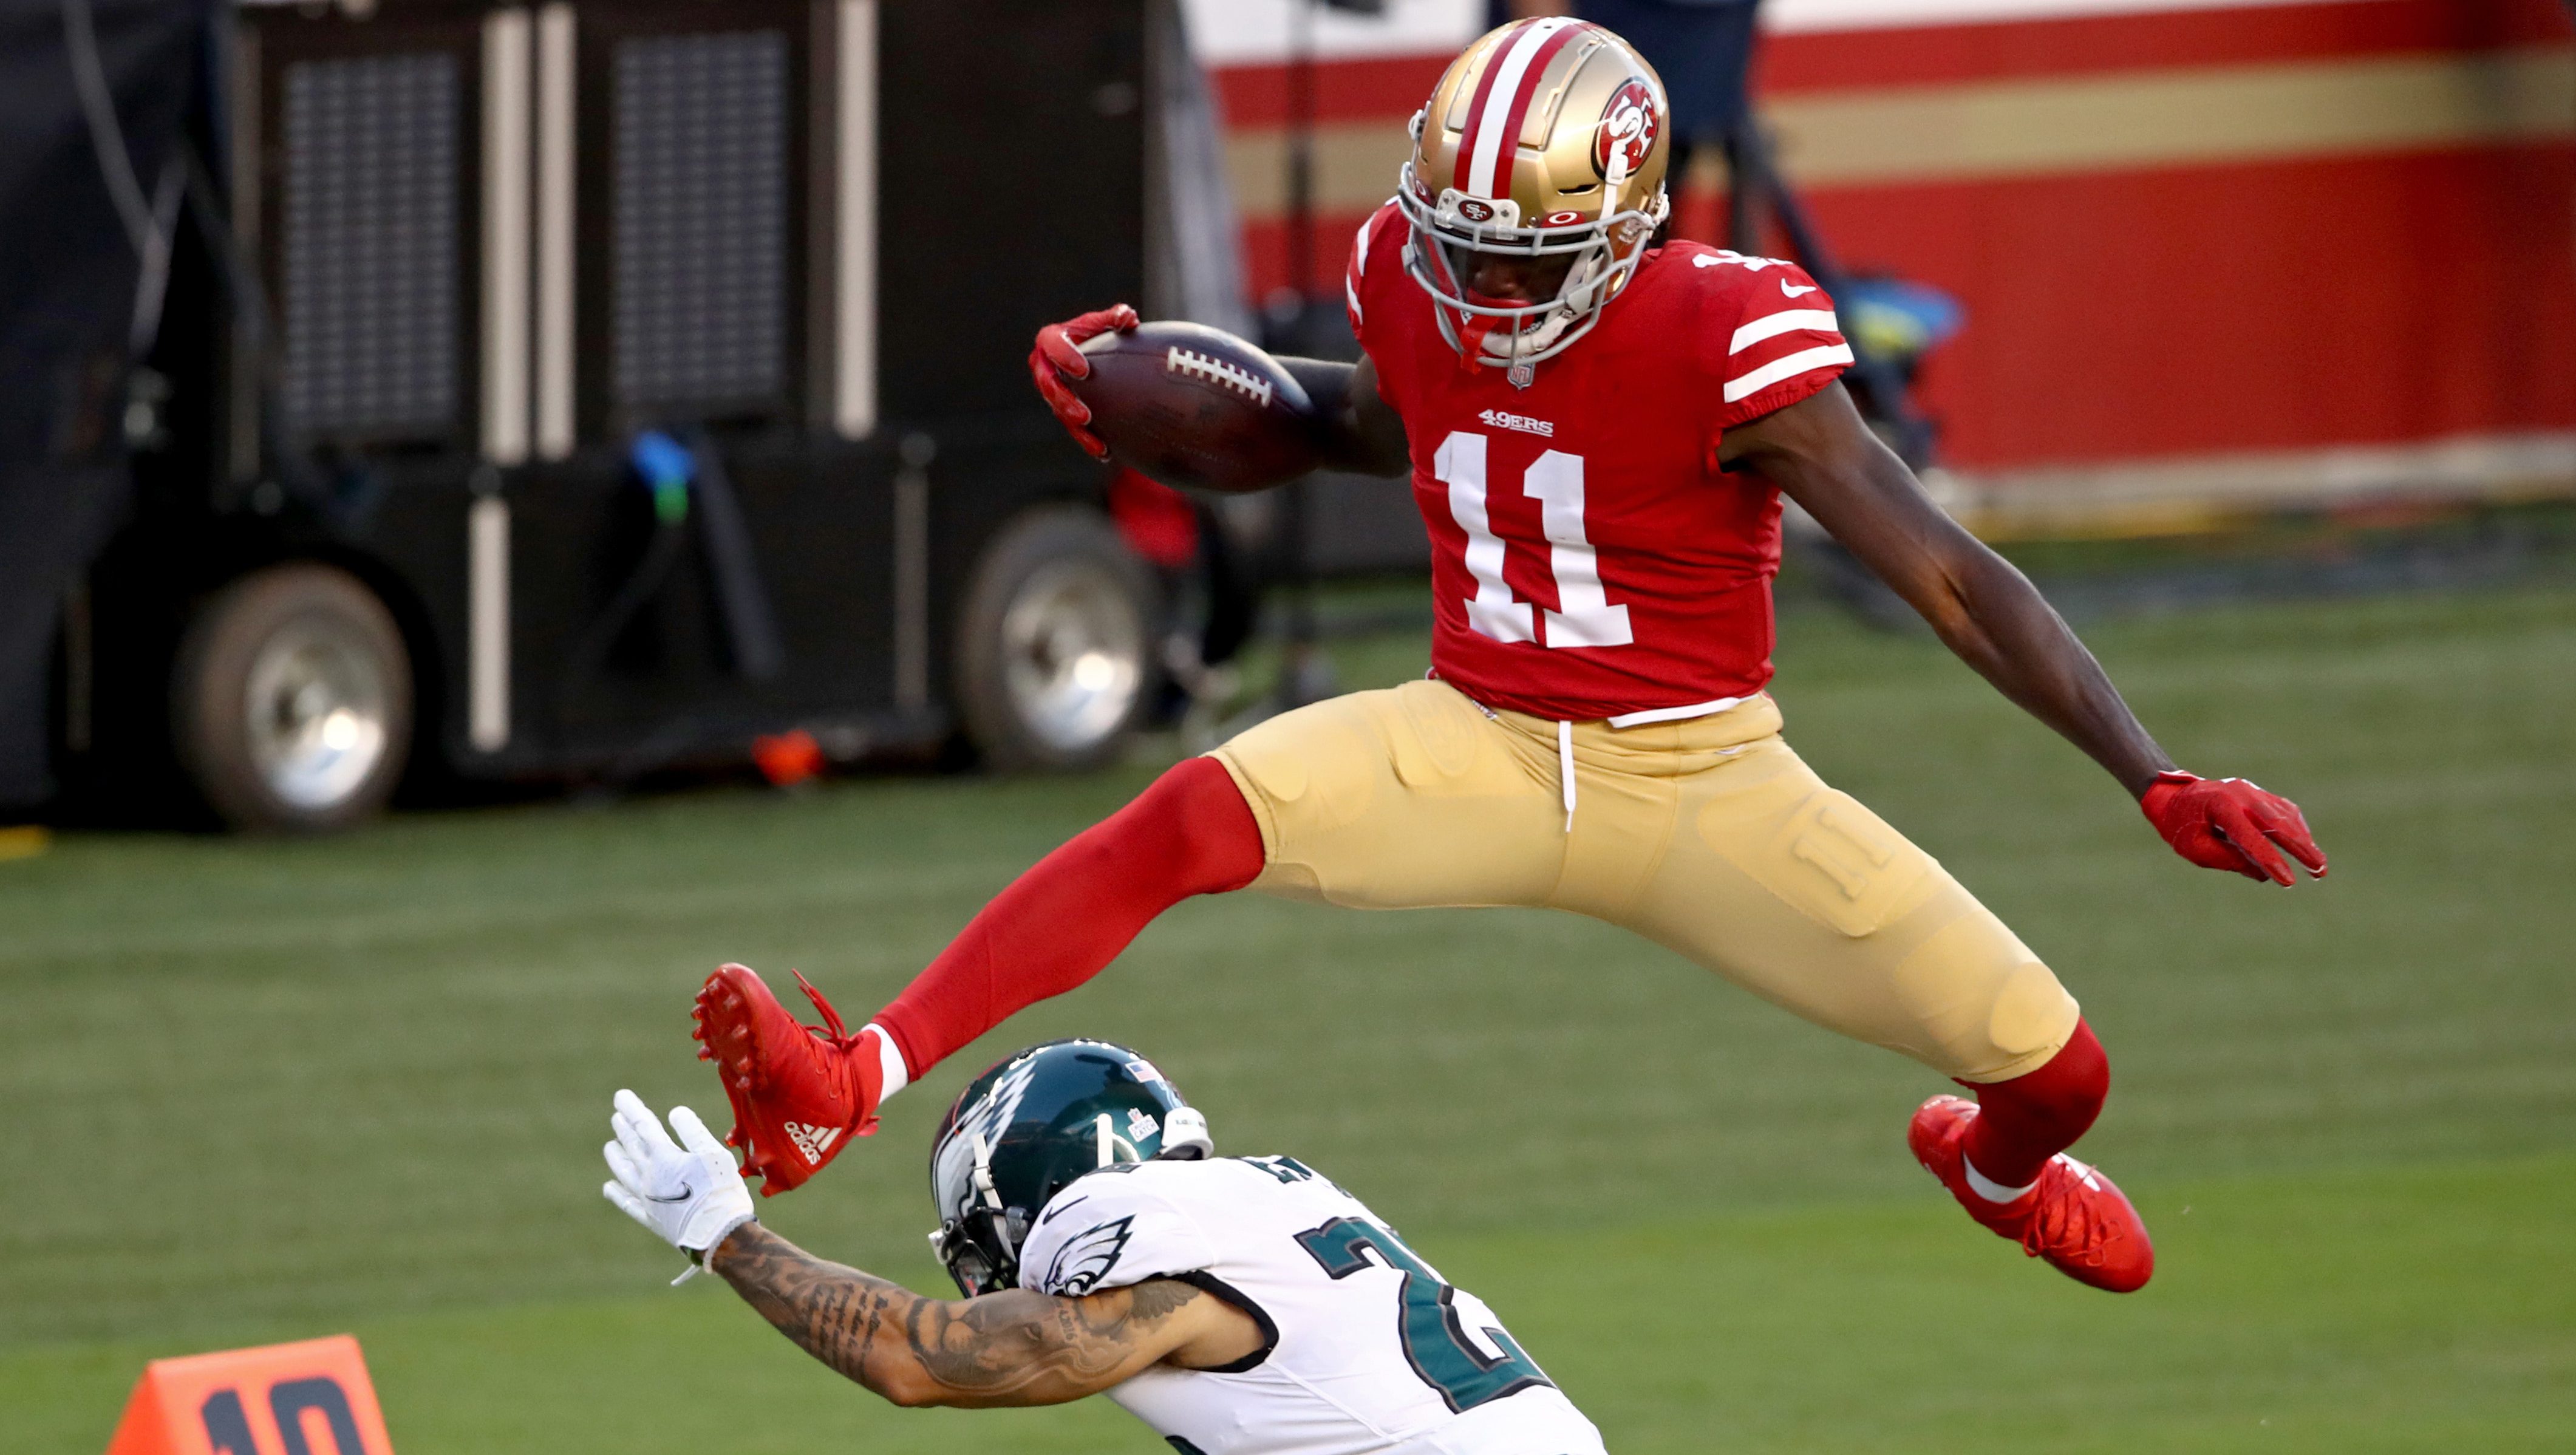 49ers Rookie Stunned Fans With Olympic Hurdle to Score